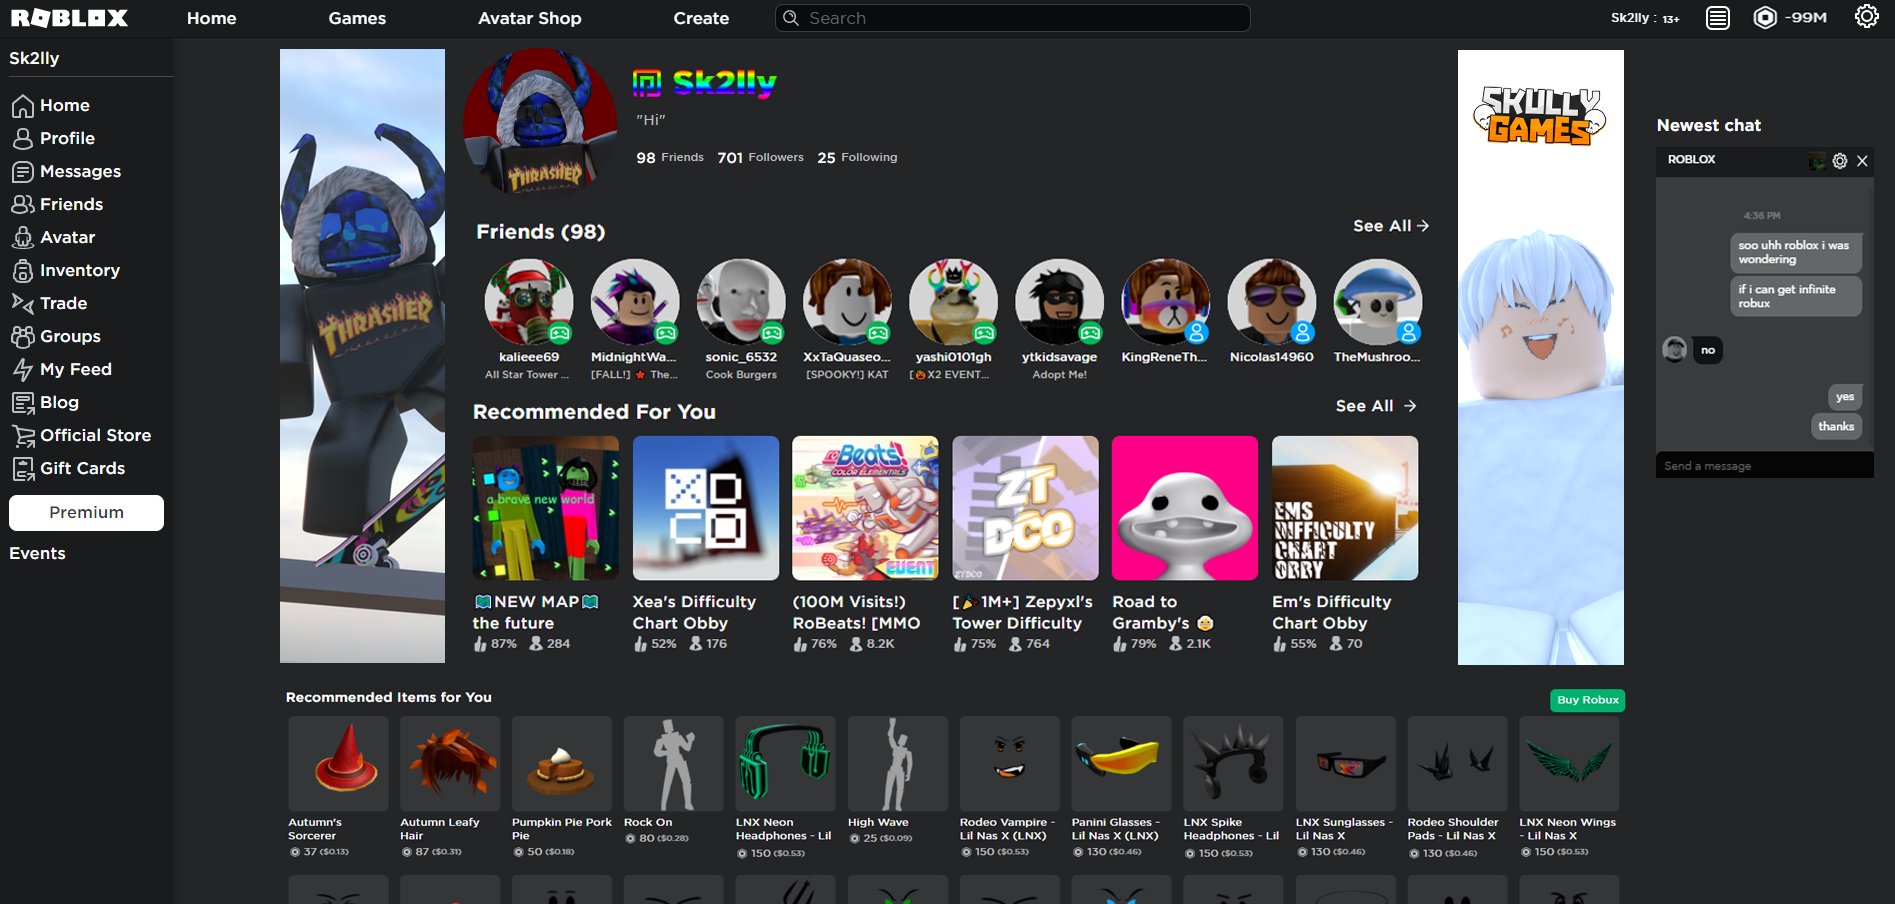 sk2lly on X: I did the roblox home page but in better ( in my